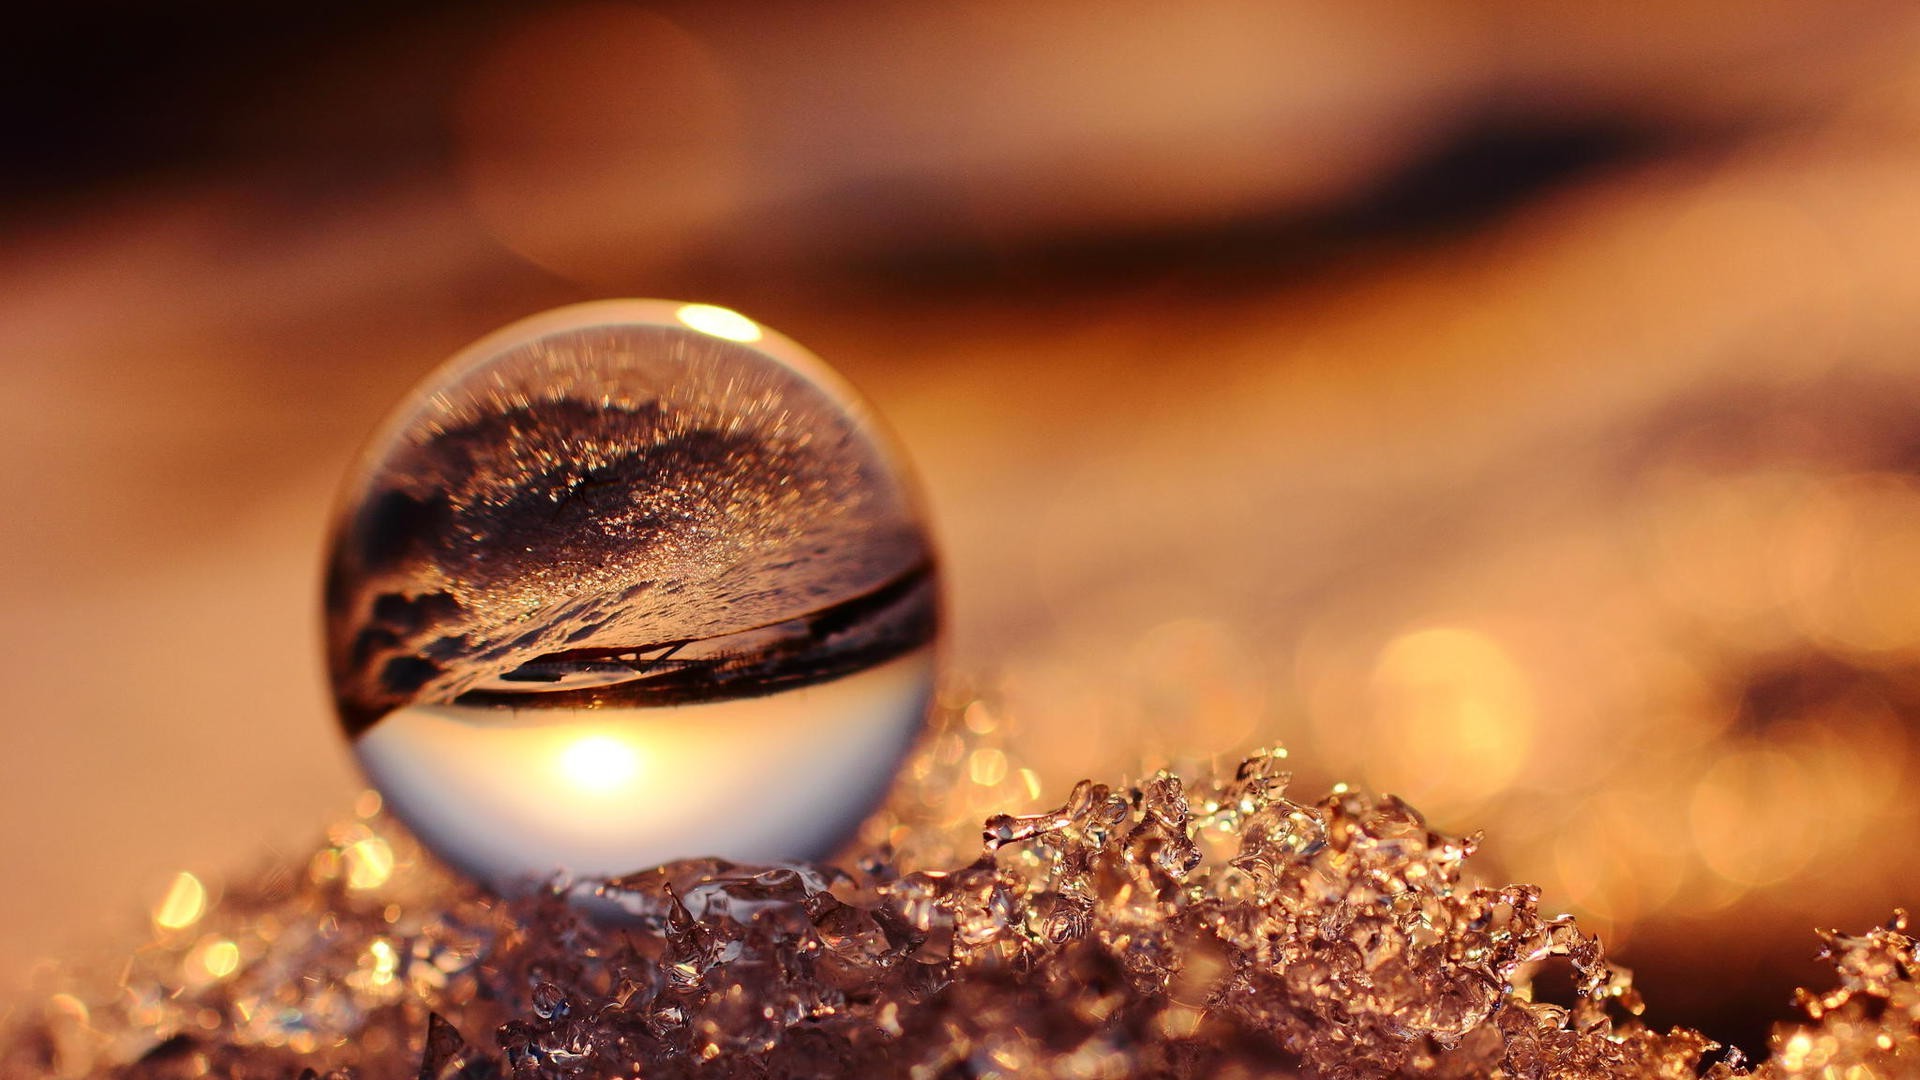 glass wallpaper,macro photography,water,close up,sphere,reflection